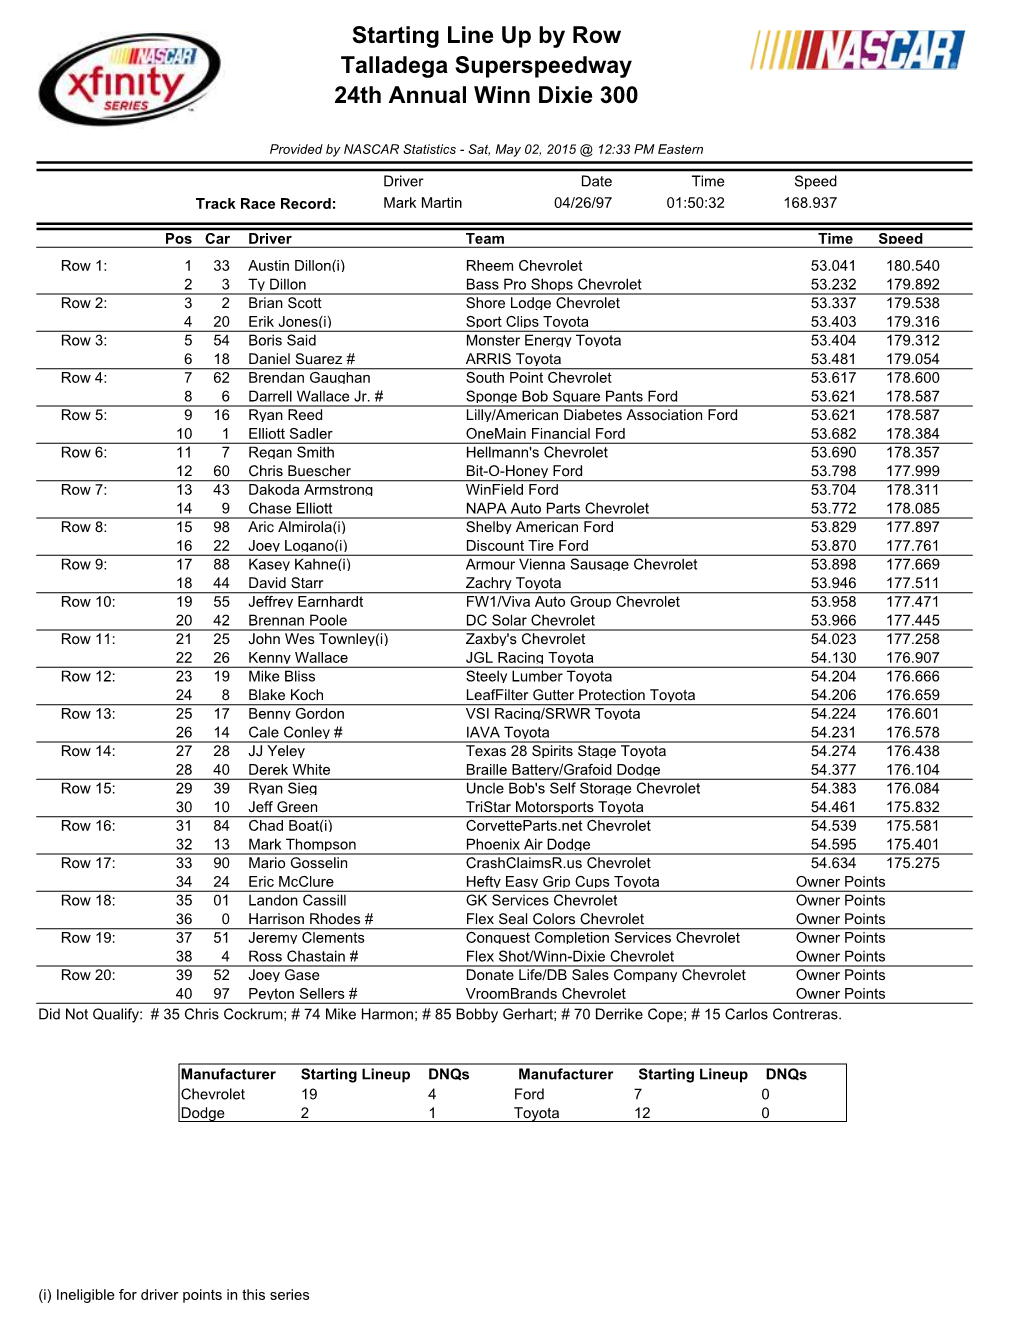 Lineup Dnqs Manufacturer Starting Lineup Dnqs Chevrolet 19 4 Ford 7 0 Dodge 2 1 Toyota 12 0